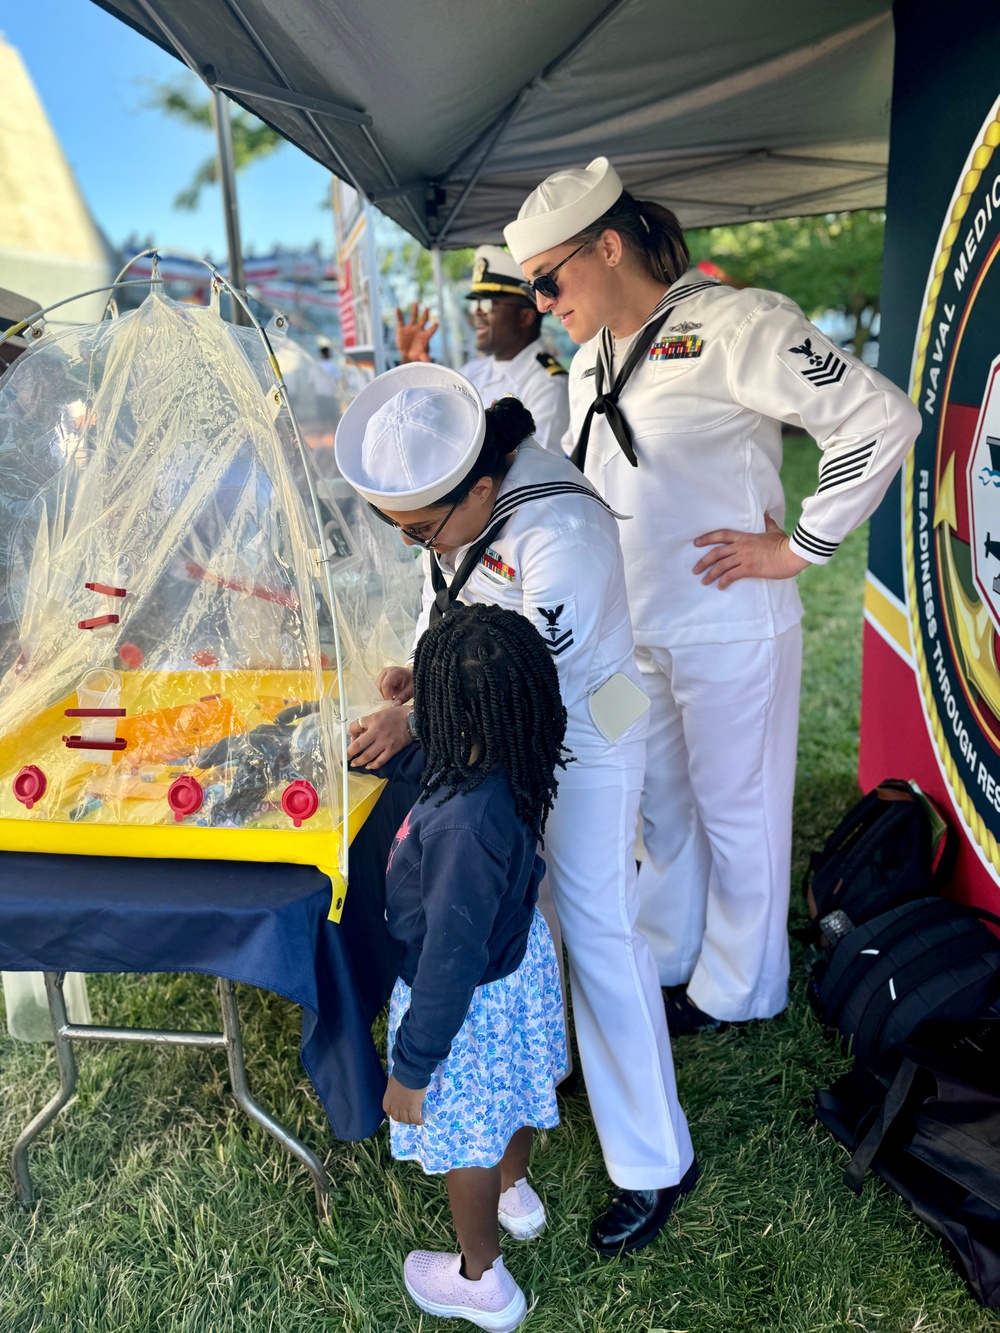 Naval Medical Research Command Participates in Maryland Fleet Week